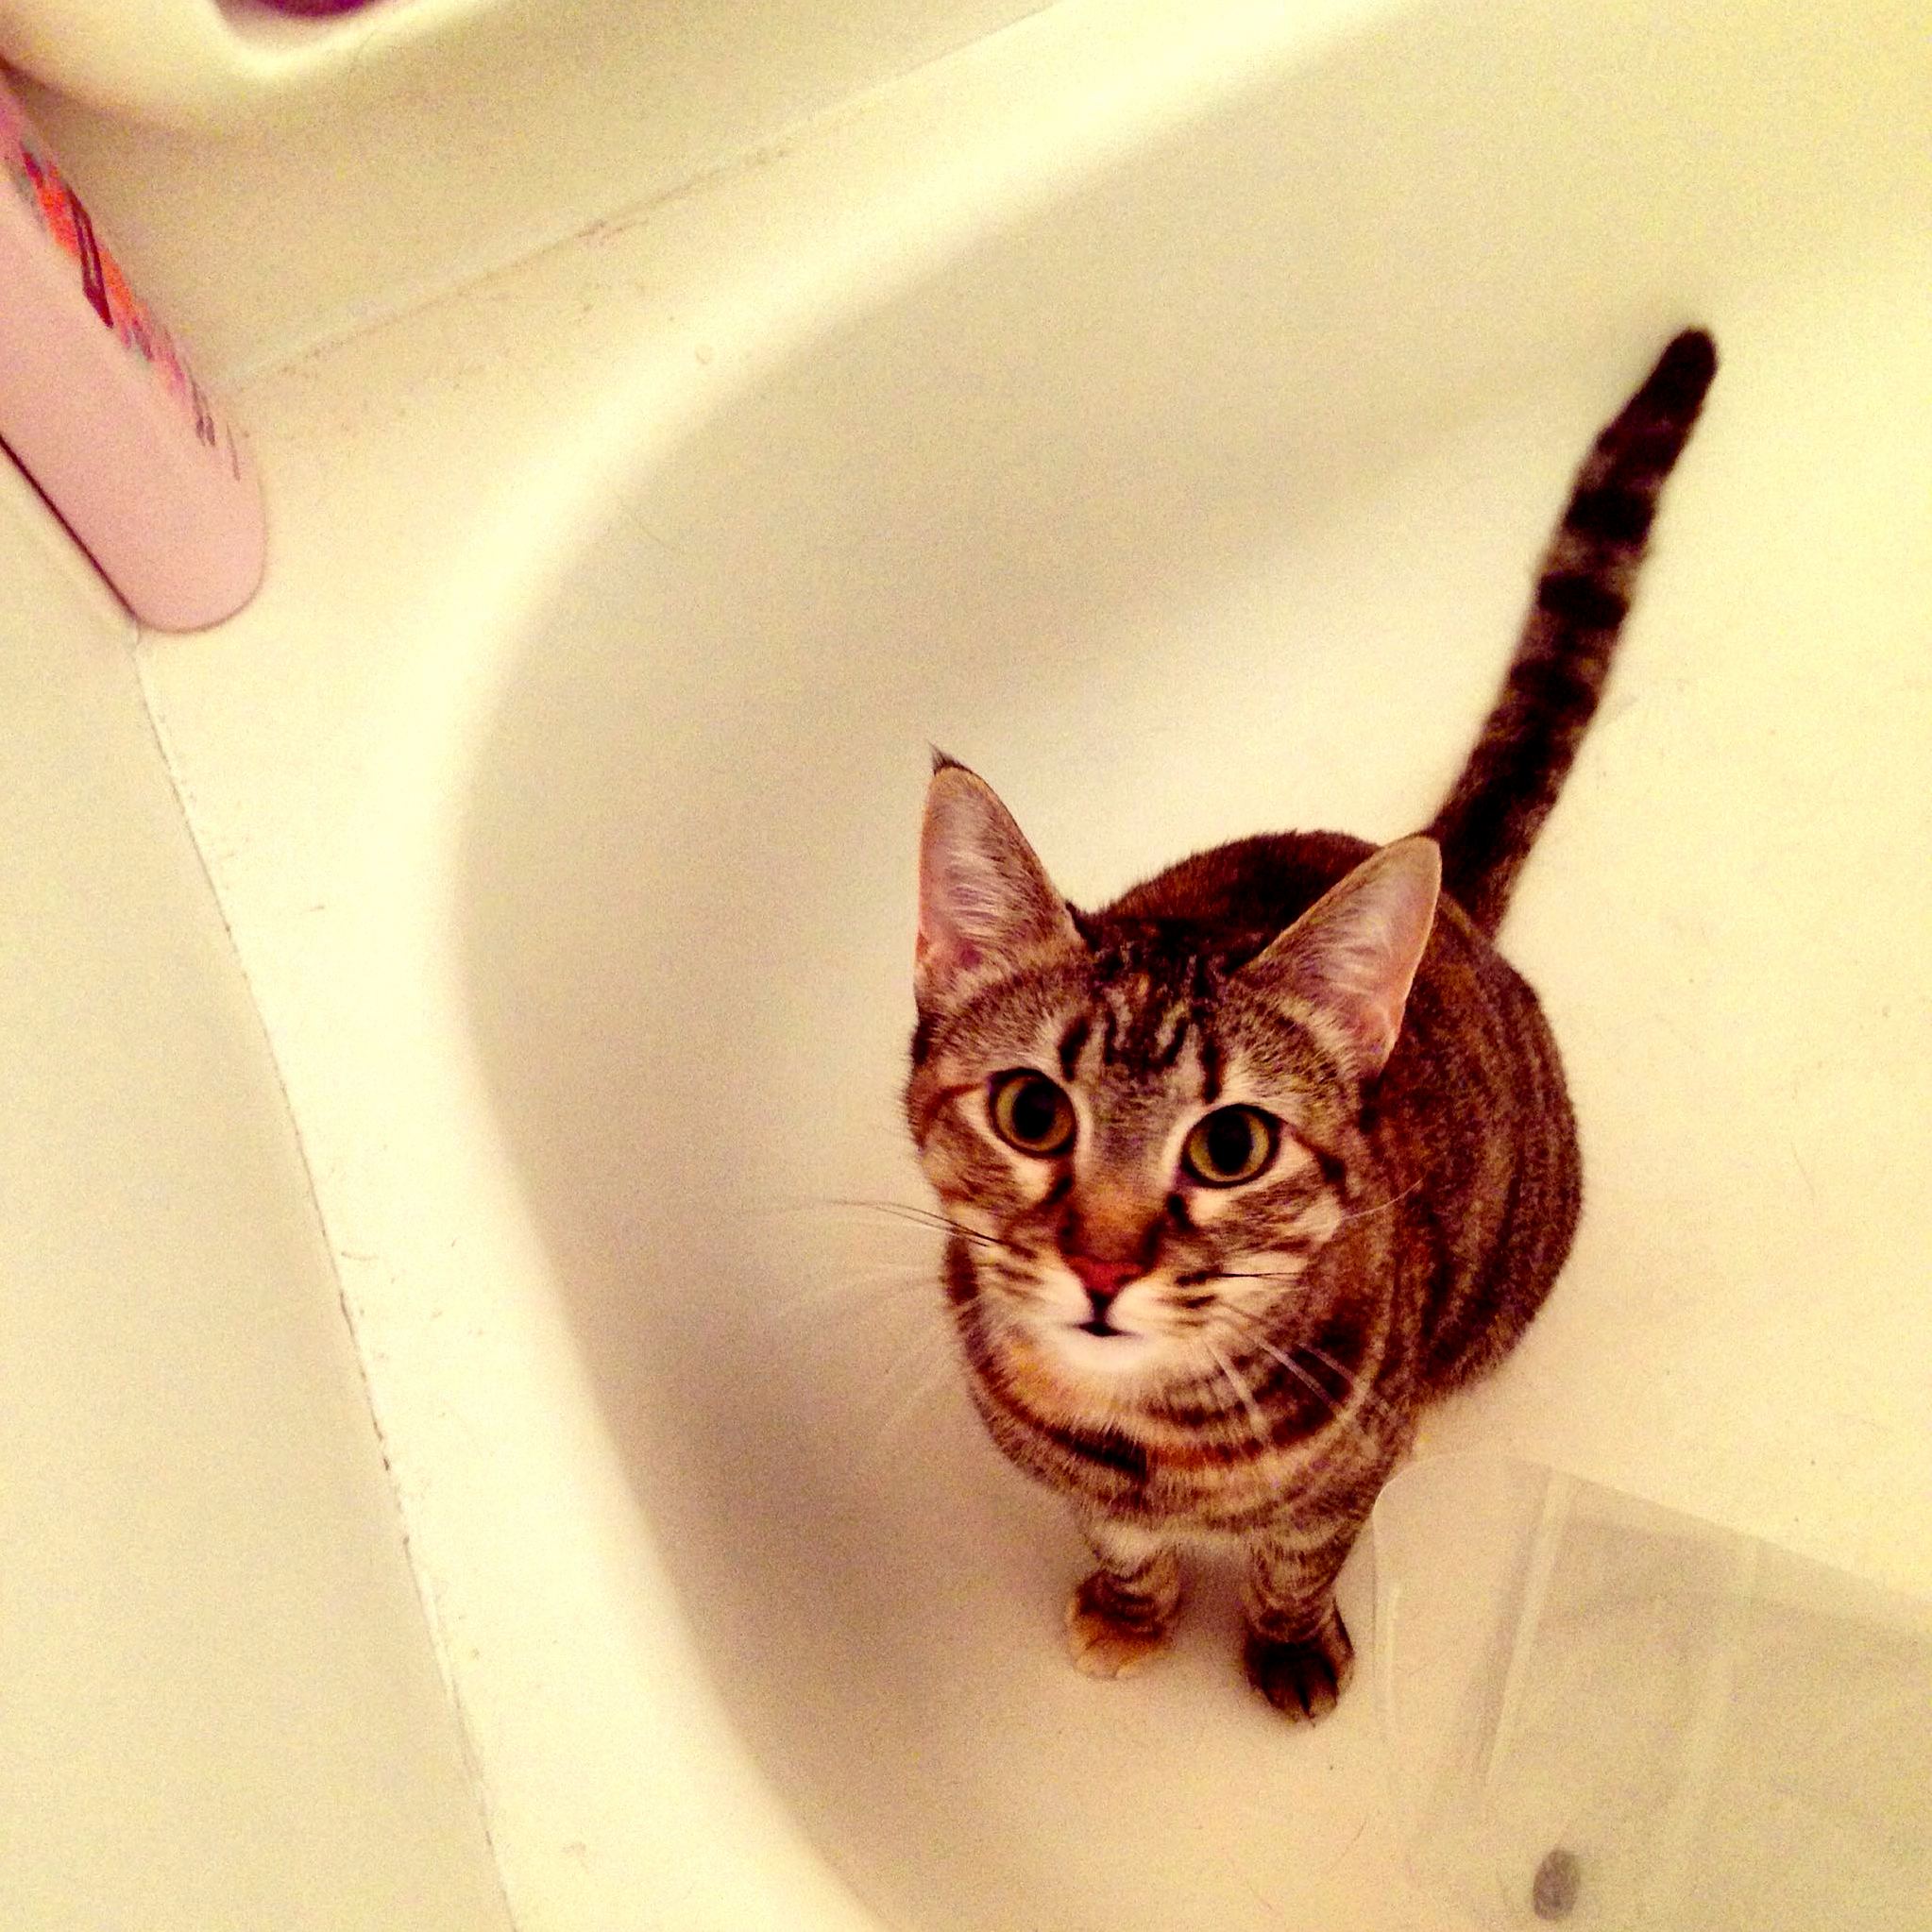 She loves playing in the tub.